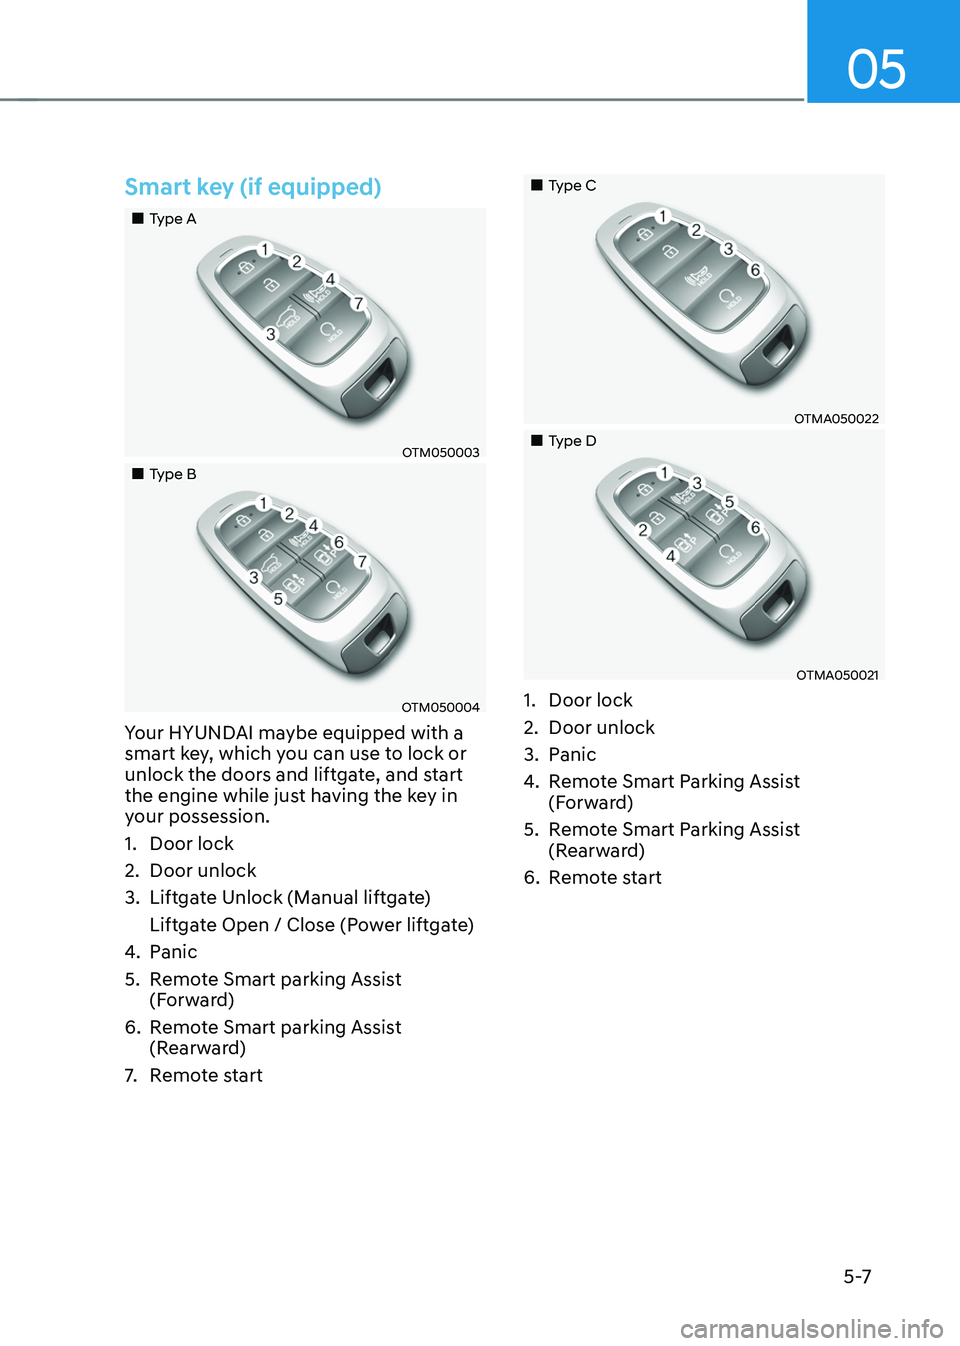 HYUNDAI TUCSON 2022  Owners Manual 05
5 -7
Smart key (if equipped)
„„Type A
OTM050003
„„Type B 
OTM050004
Your HYUNDAI maybe equipped with a 
smart key, which you can use to lock or 
unlock the doors and liftgate, a